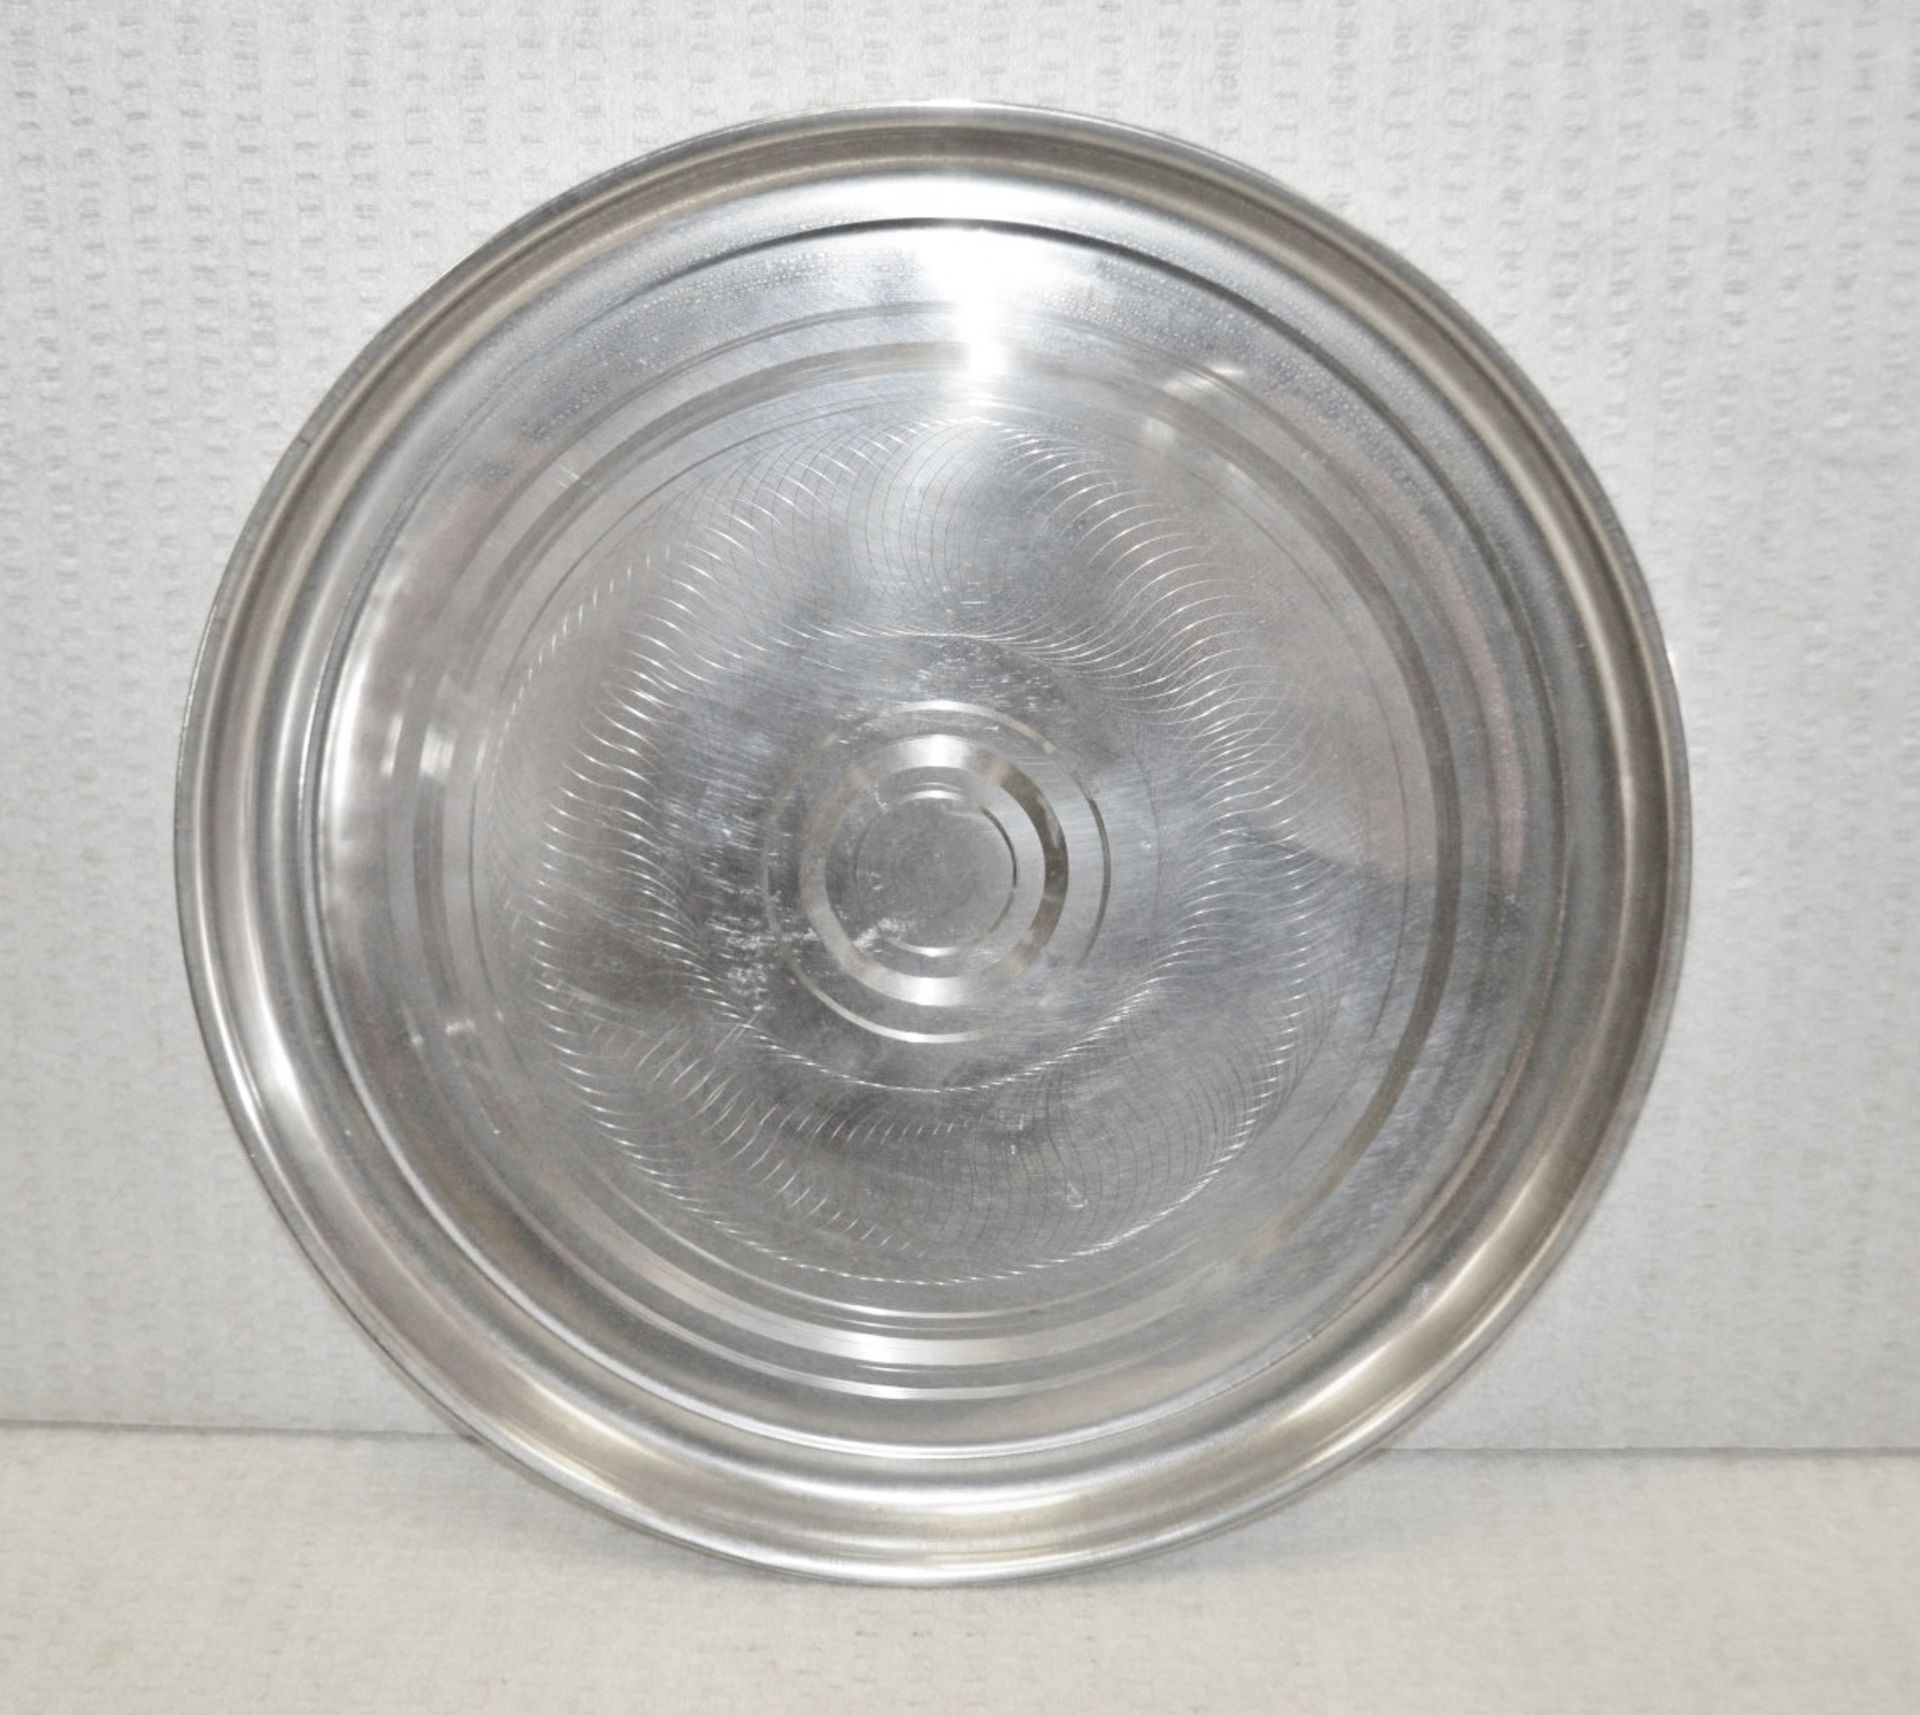 3 x Large Stainless Steel Silver Serving Trays - Dimensions: L45 x W45 cm - Recently Removed From - Image 3 of 3